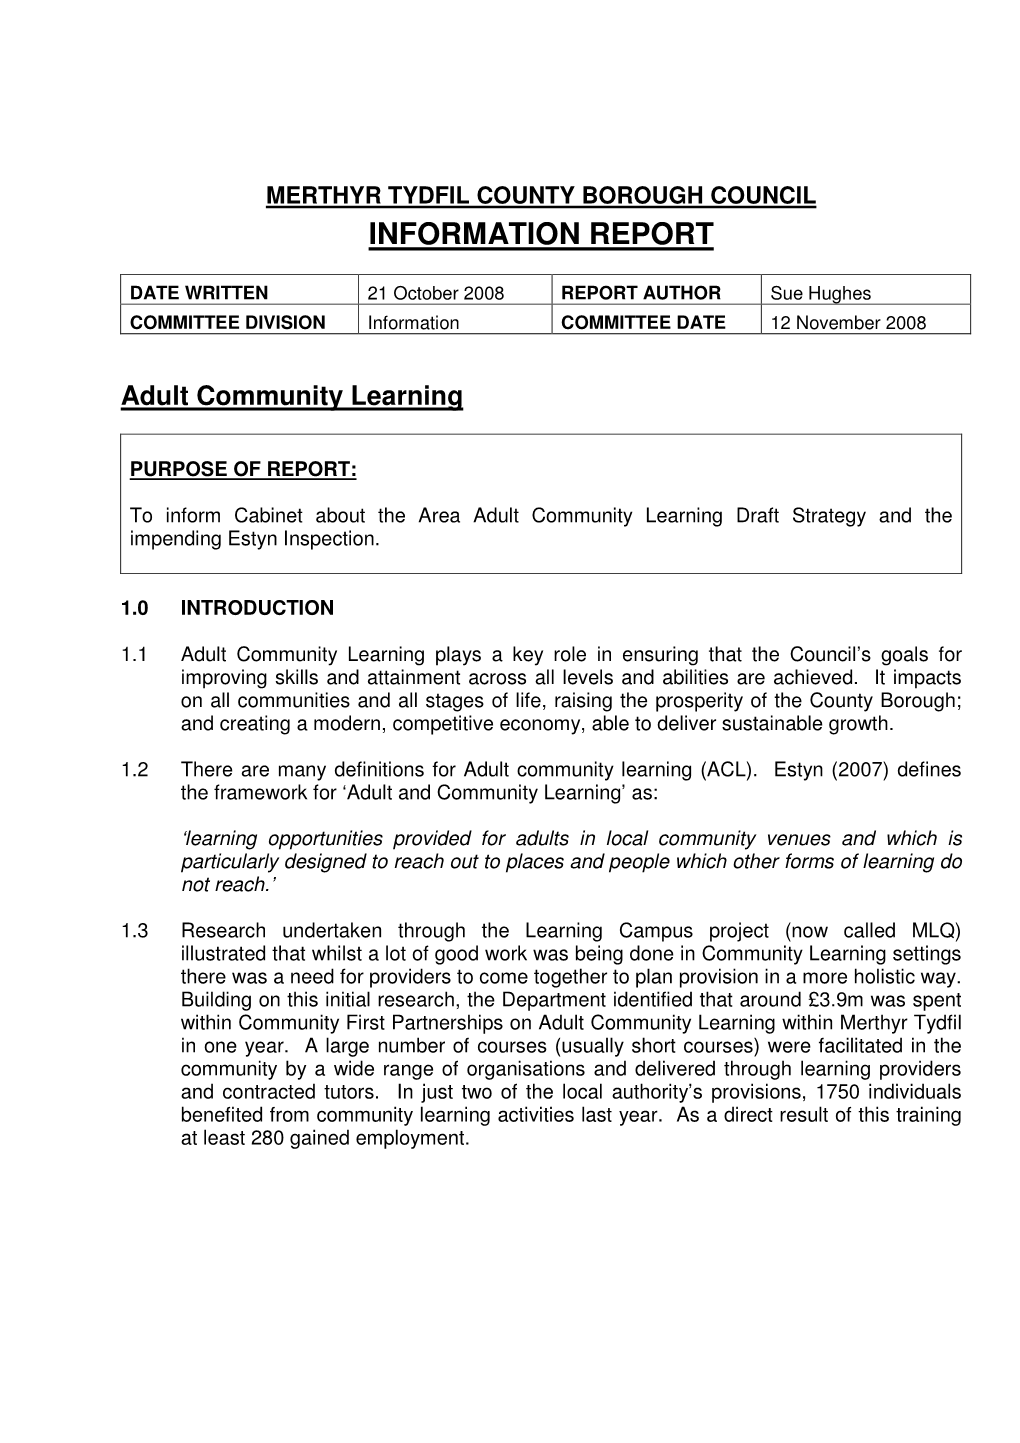 Adult Community Learning